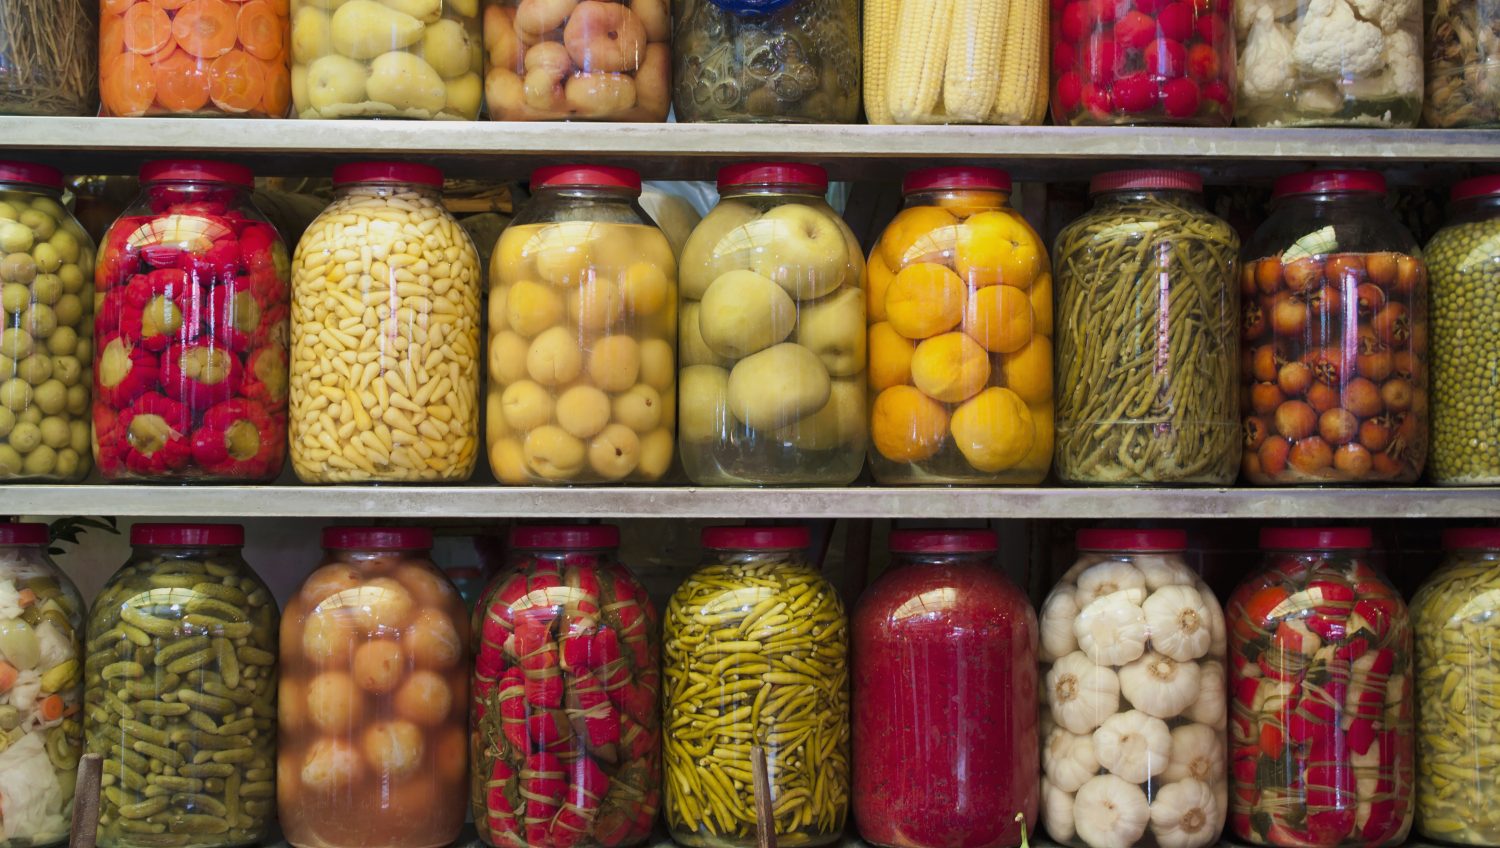 Four Tips for Preserving Foods